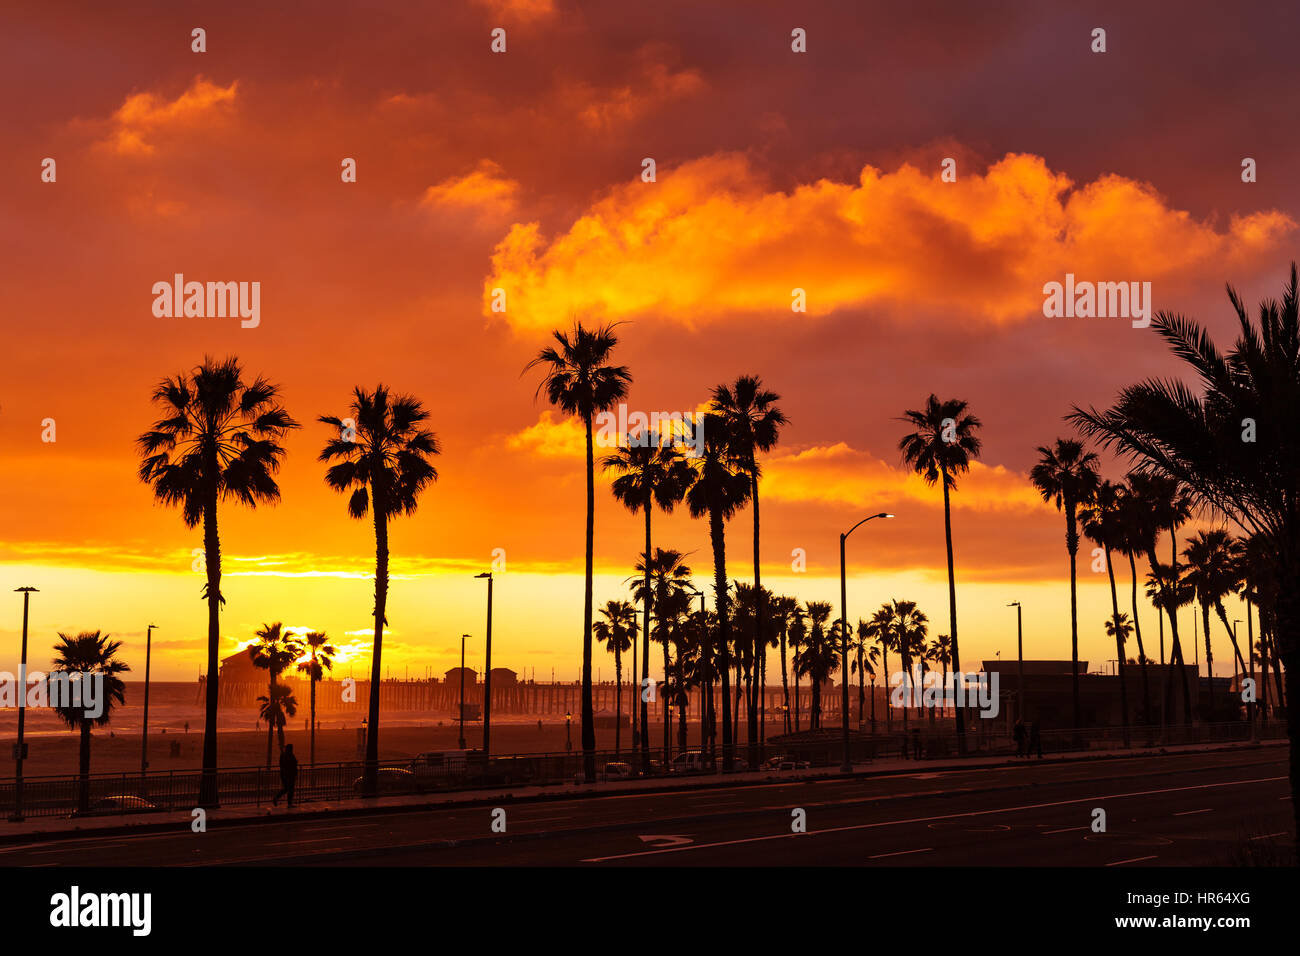 Colorful sunset with palm trees in silhouette in Huntington Beach, California, USA Stock Photo